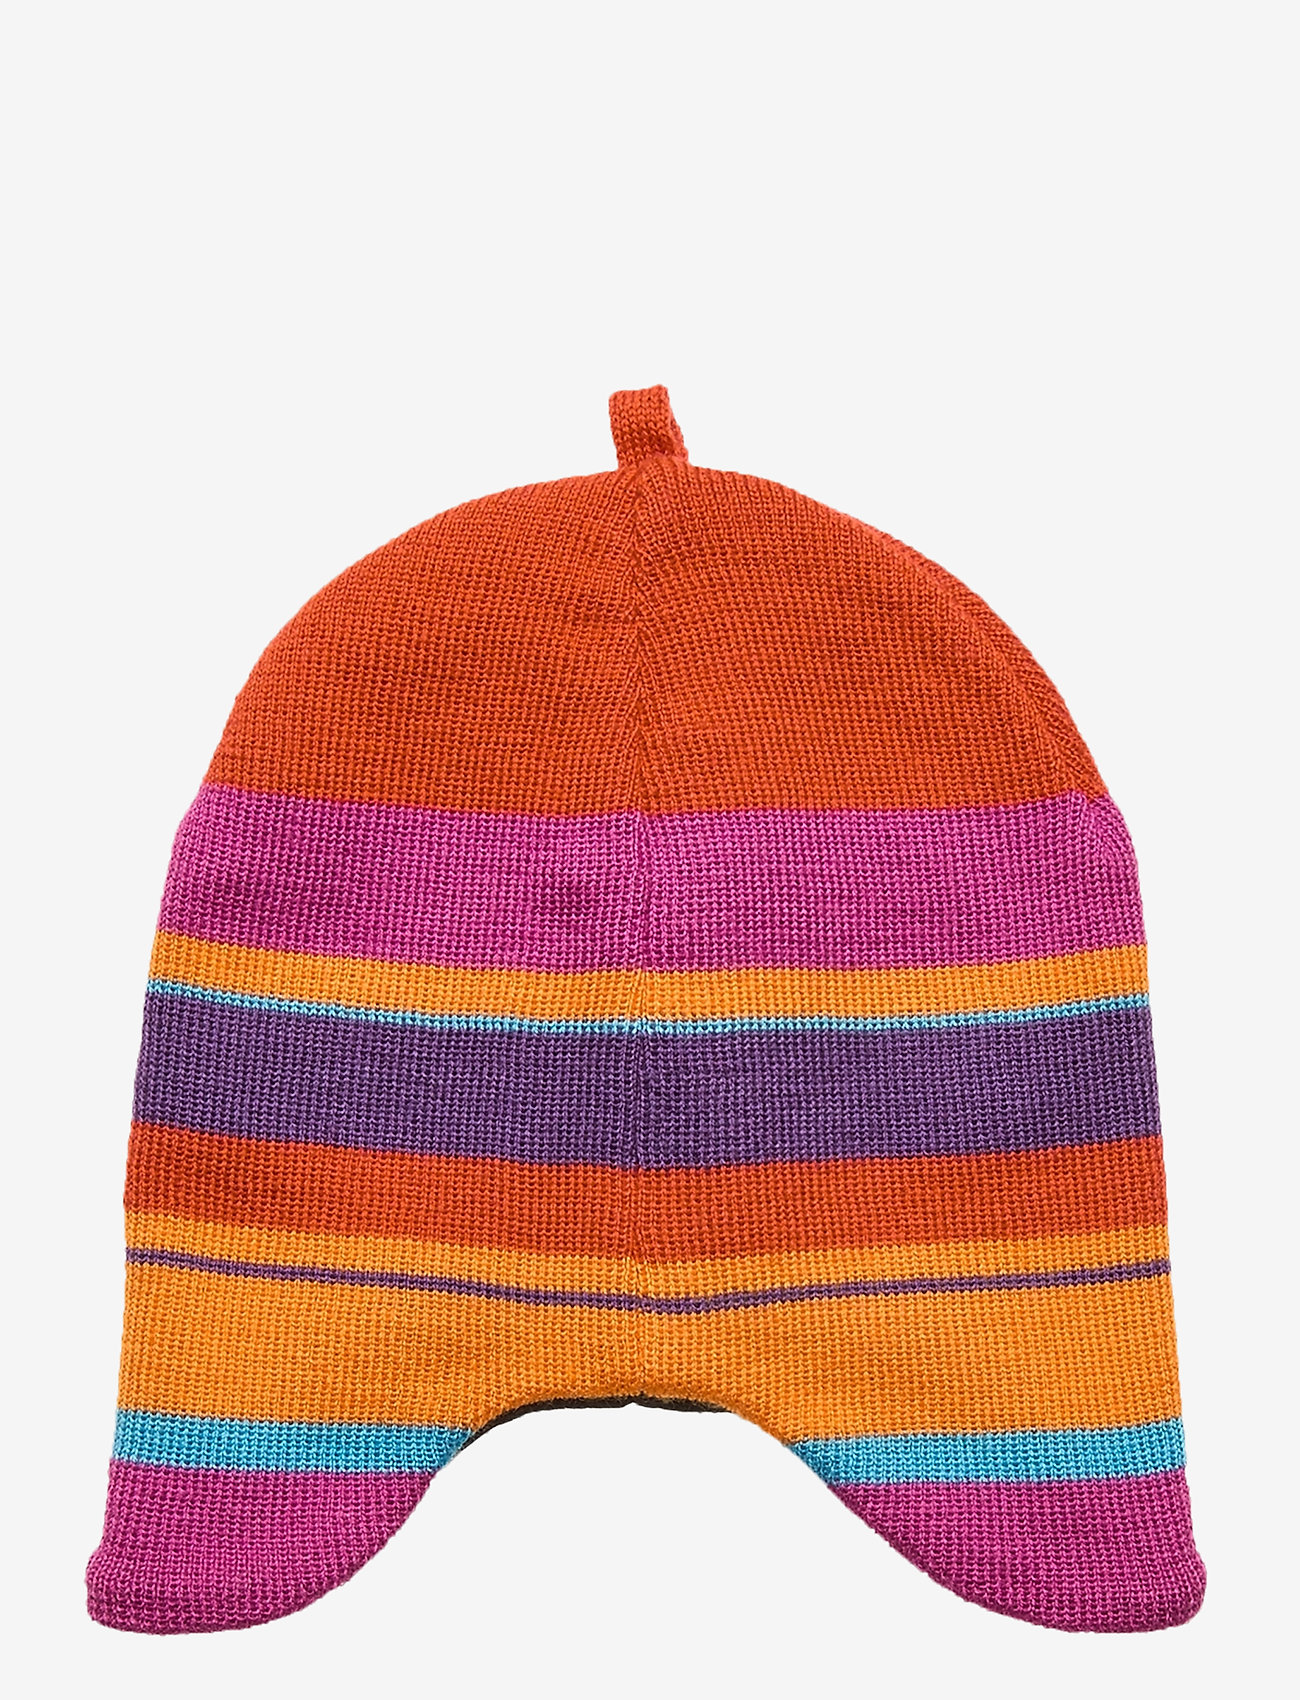 ISBJÖRN of Sweden - EAGLET Knitted Cap - alhaisimmat hinnat - coral - 1